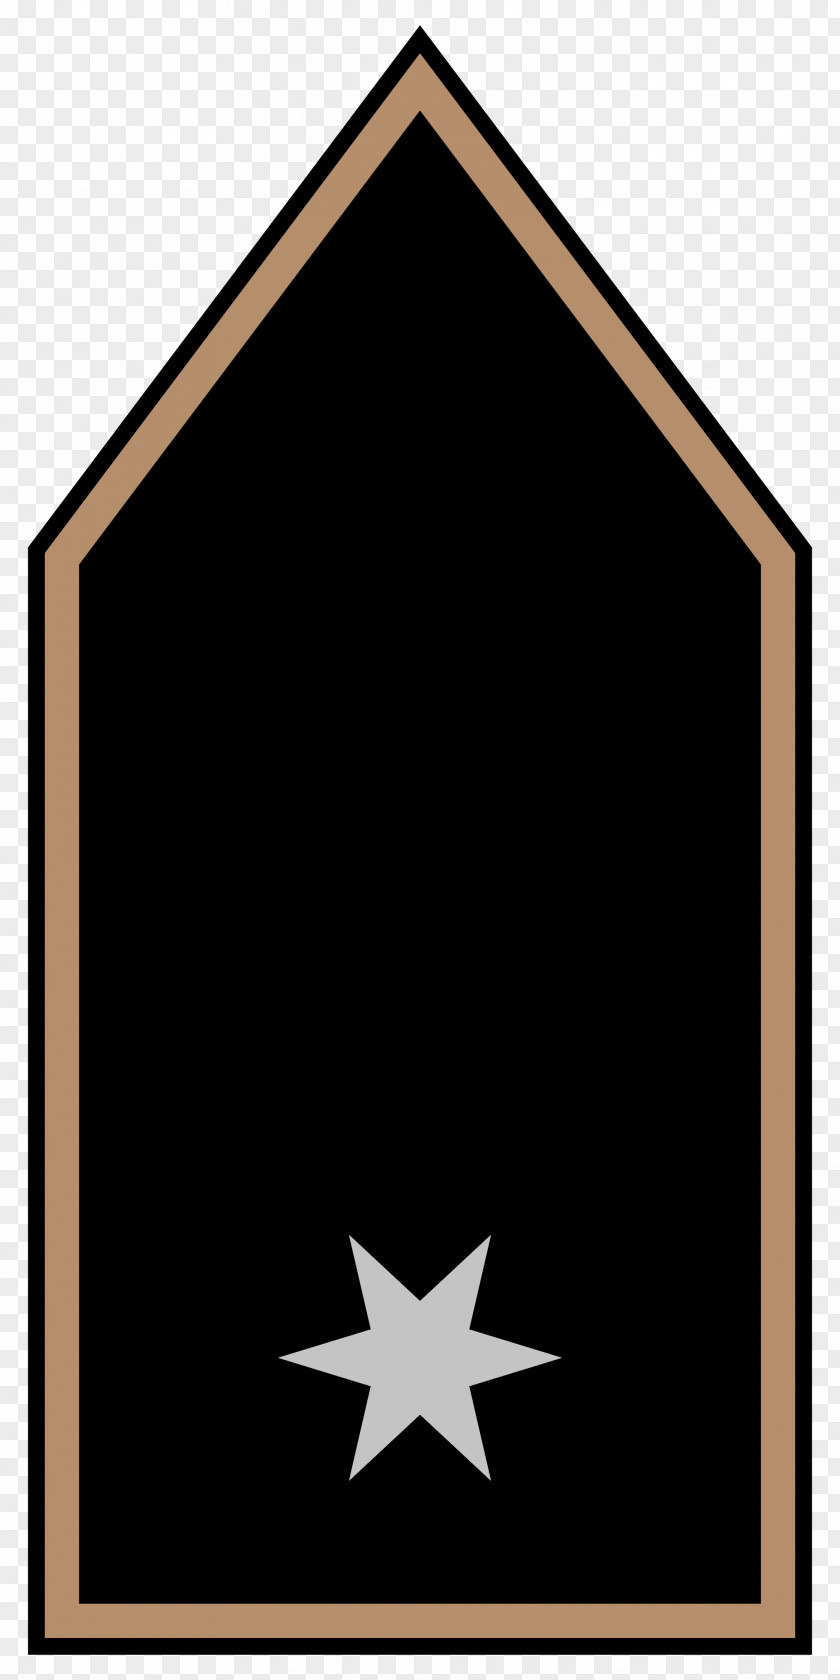 *2* Military Rank Sergeant Captain Army Officer PNG